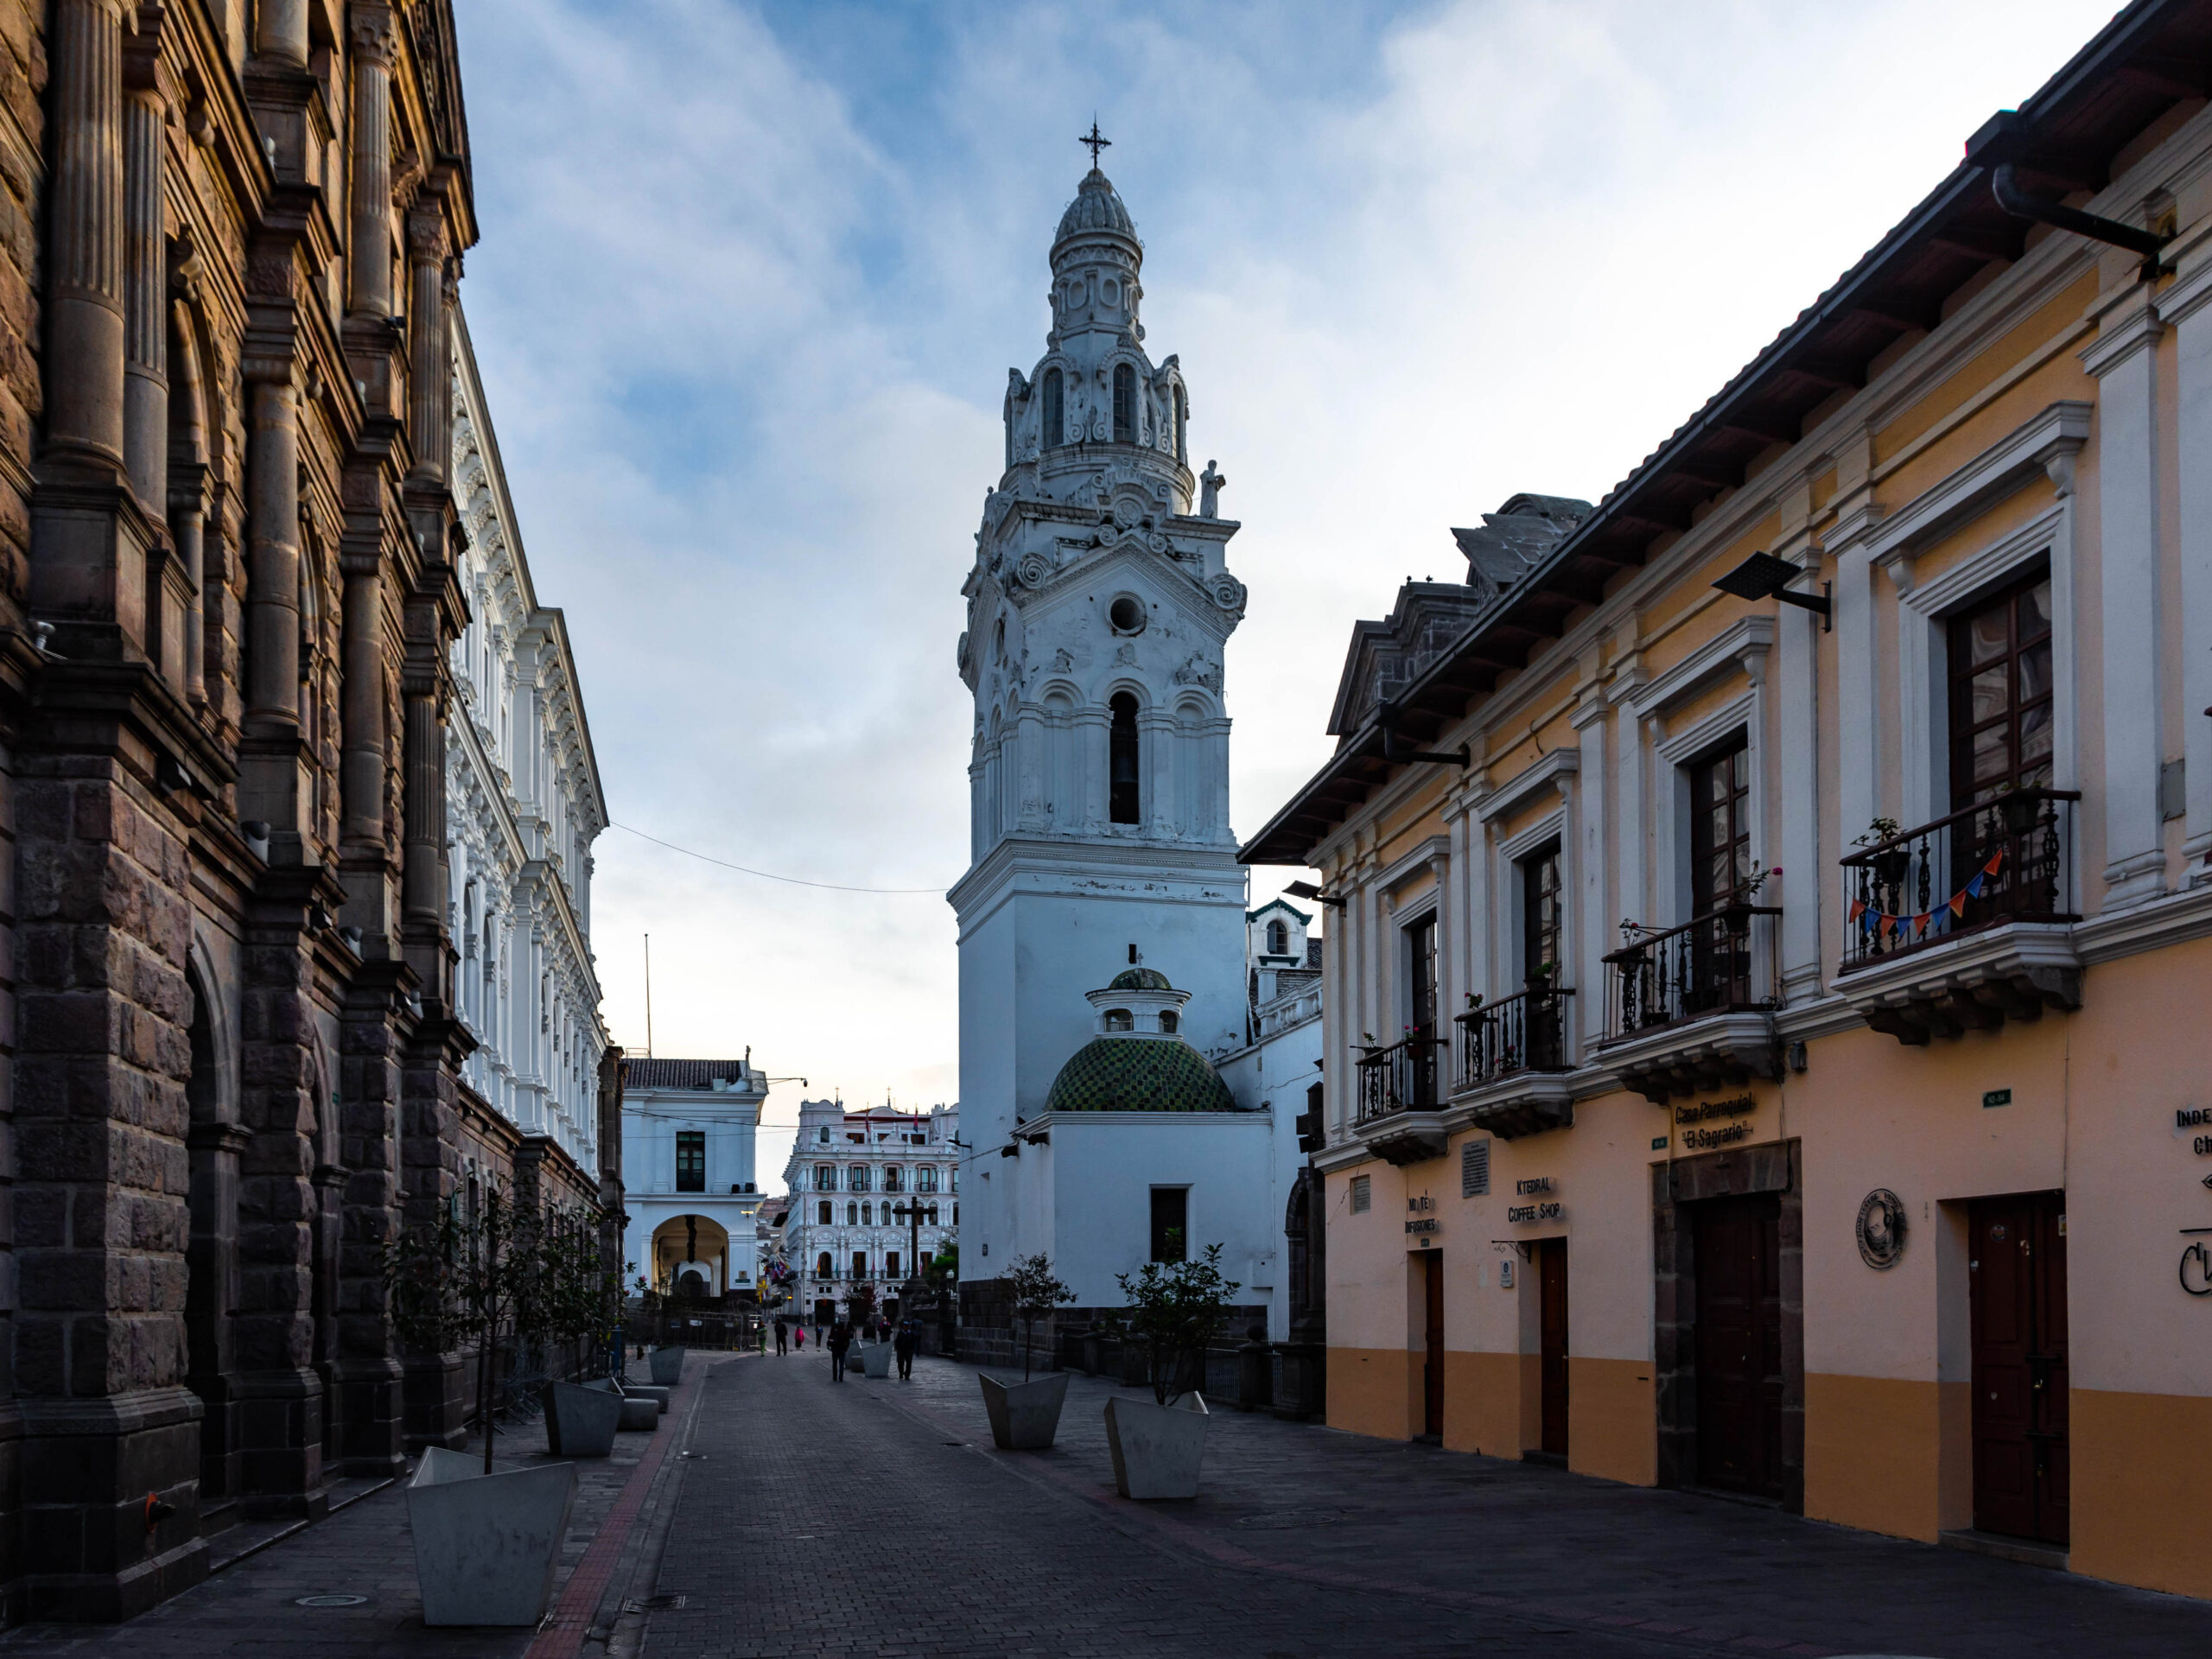 The old town of Quito